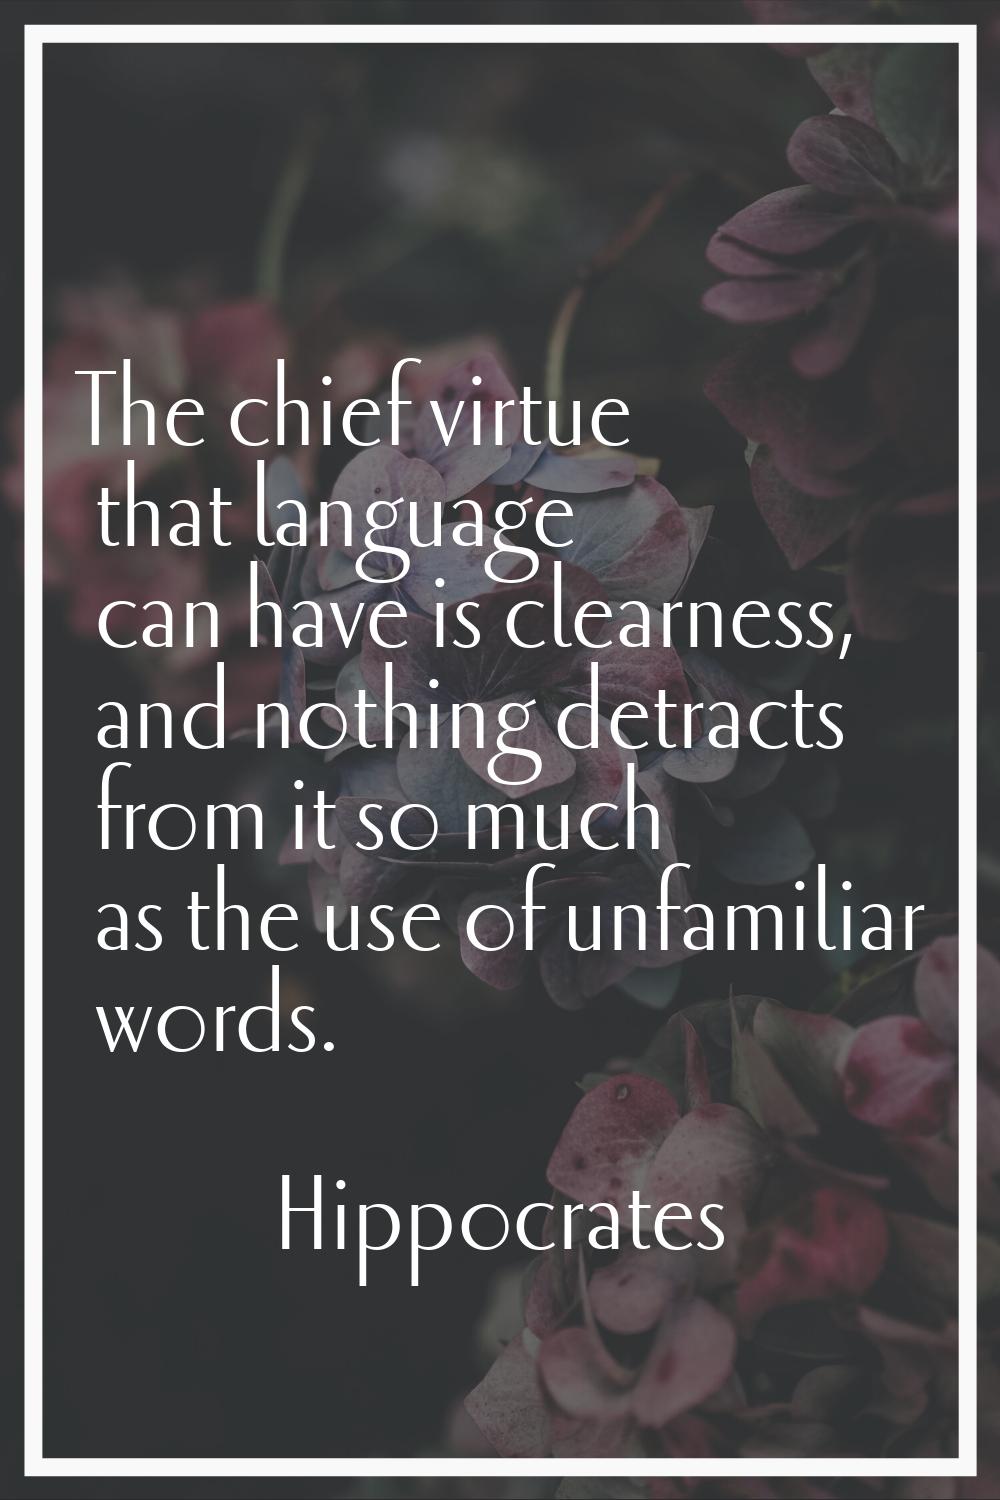 The chief virtue that language can have is clearness, and nothing detracts from it so much as the u